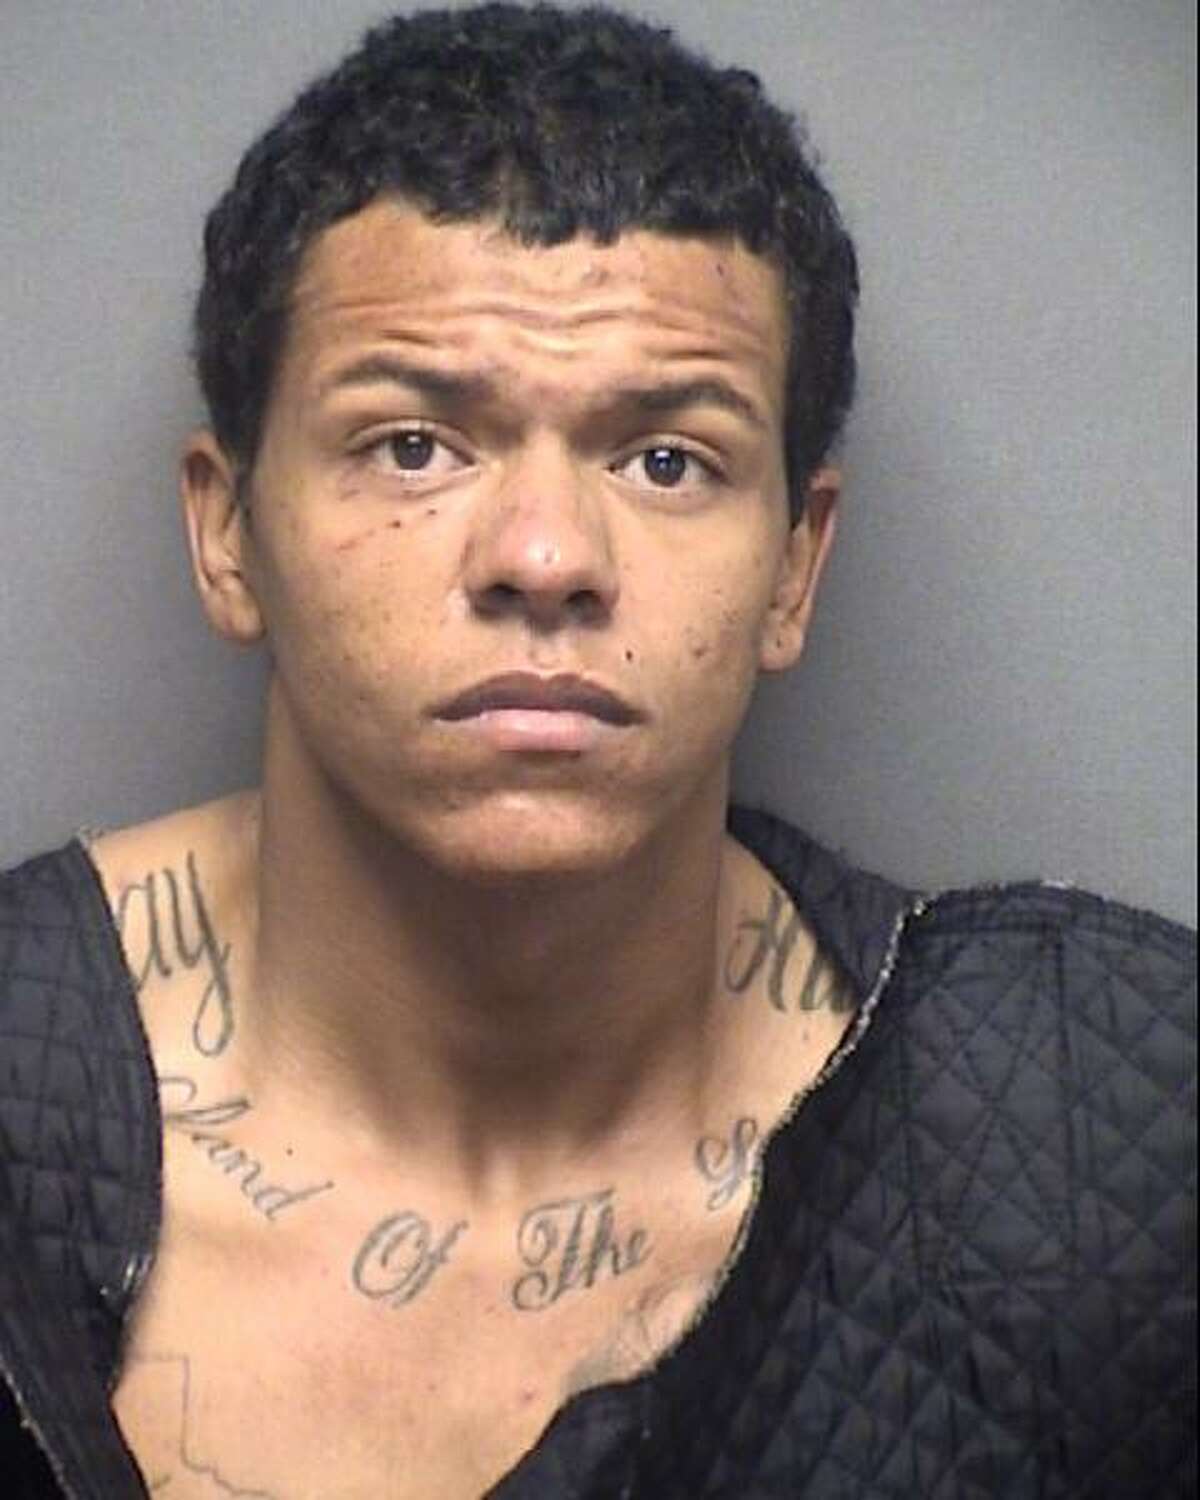 Paris Shaw, 24, was arrested Sunday by San Antonio police after a caller reported seeing a man looking into vehicles on the Northwest Side. It was later revealed that Shaw was wanted by the Bexar County Sheriff’s Office in connection with a shooting on Thanksgiving Day that resulted in a woman’s death on Nov. 27.